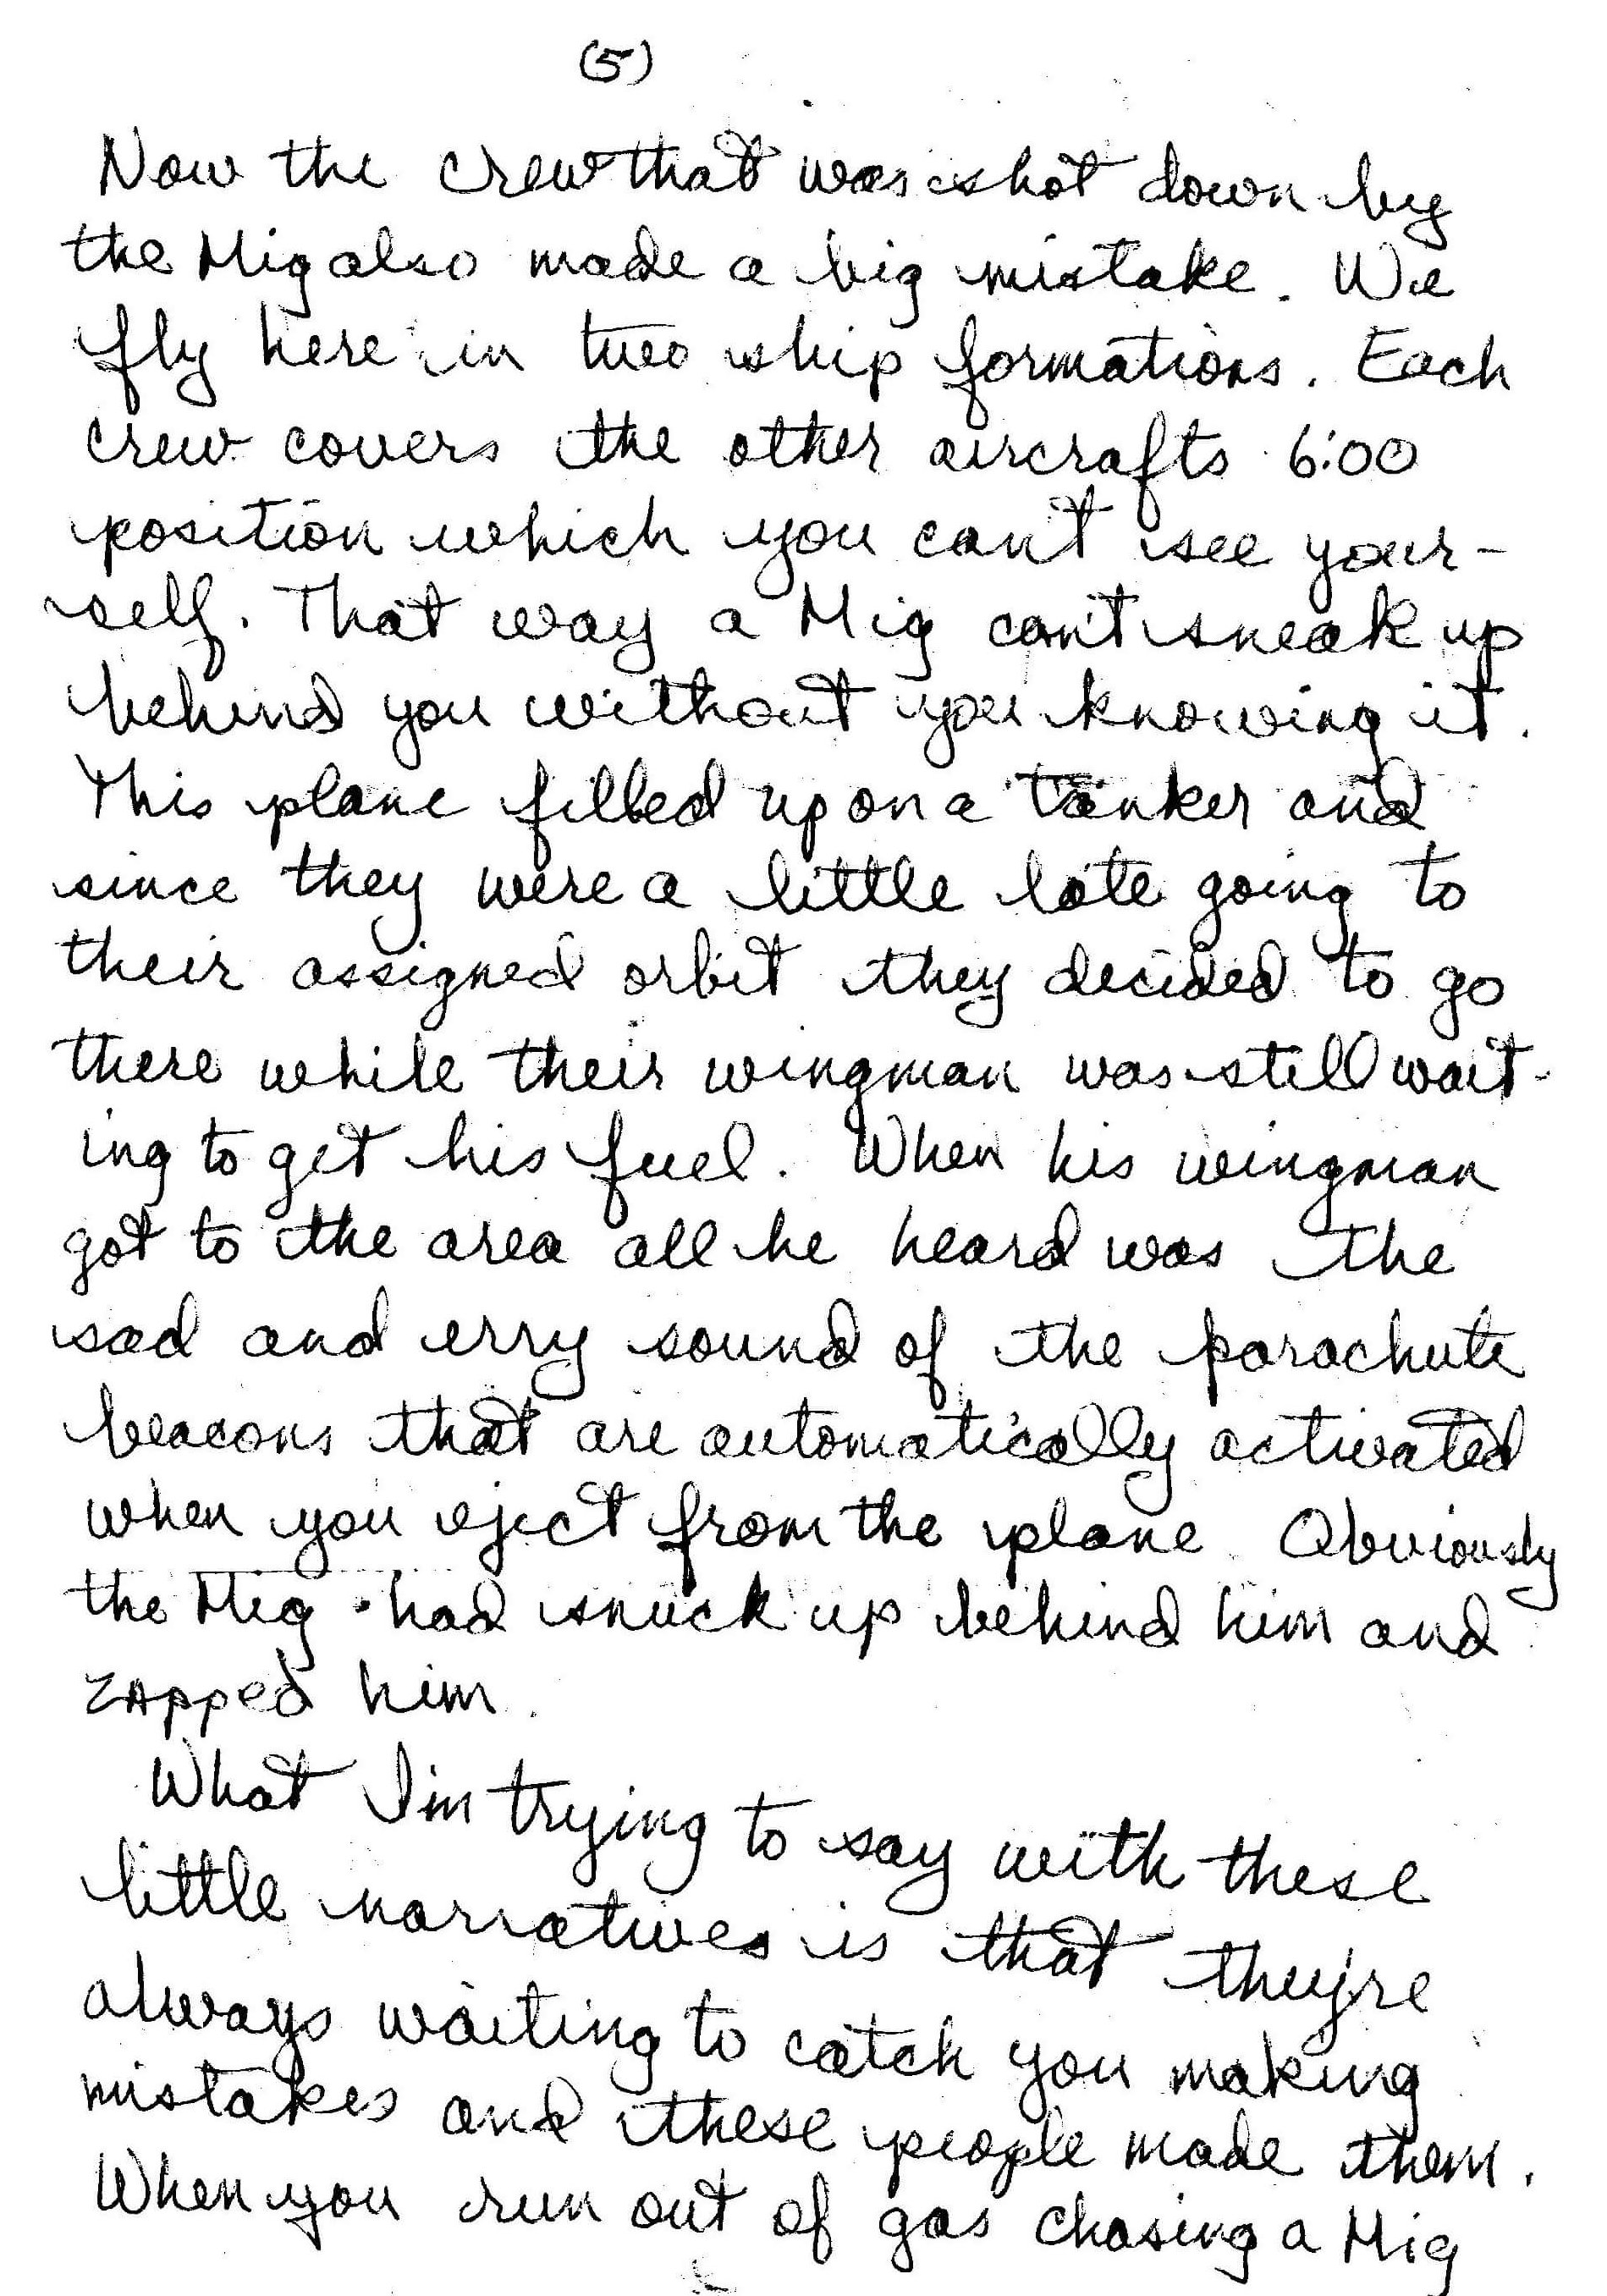 Page 5 of a letter home.